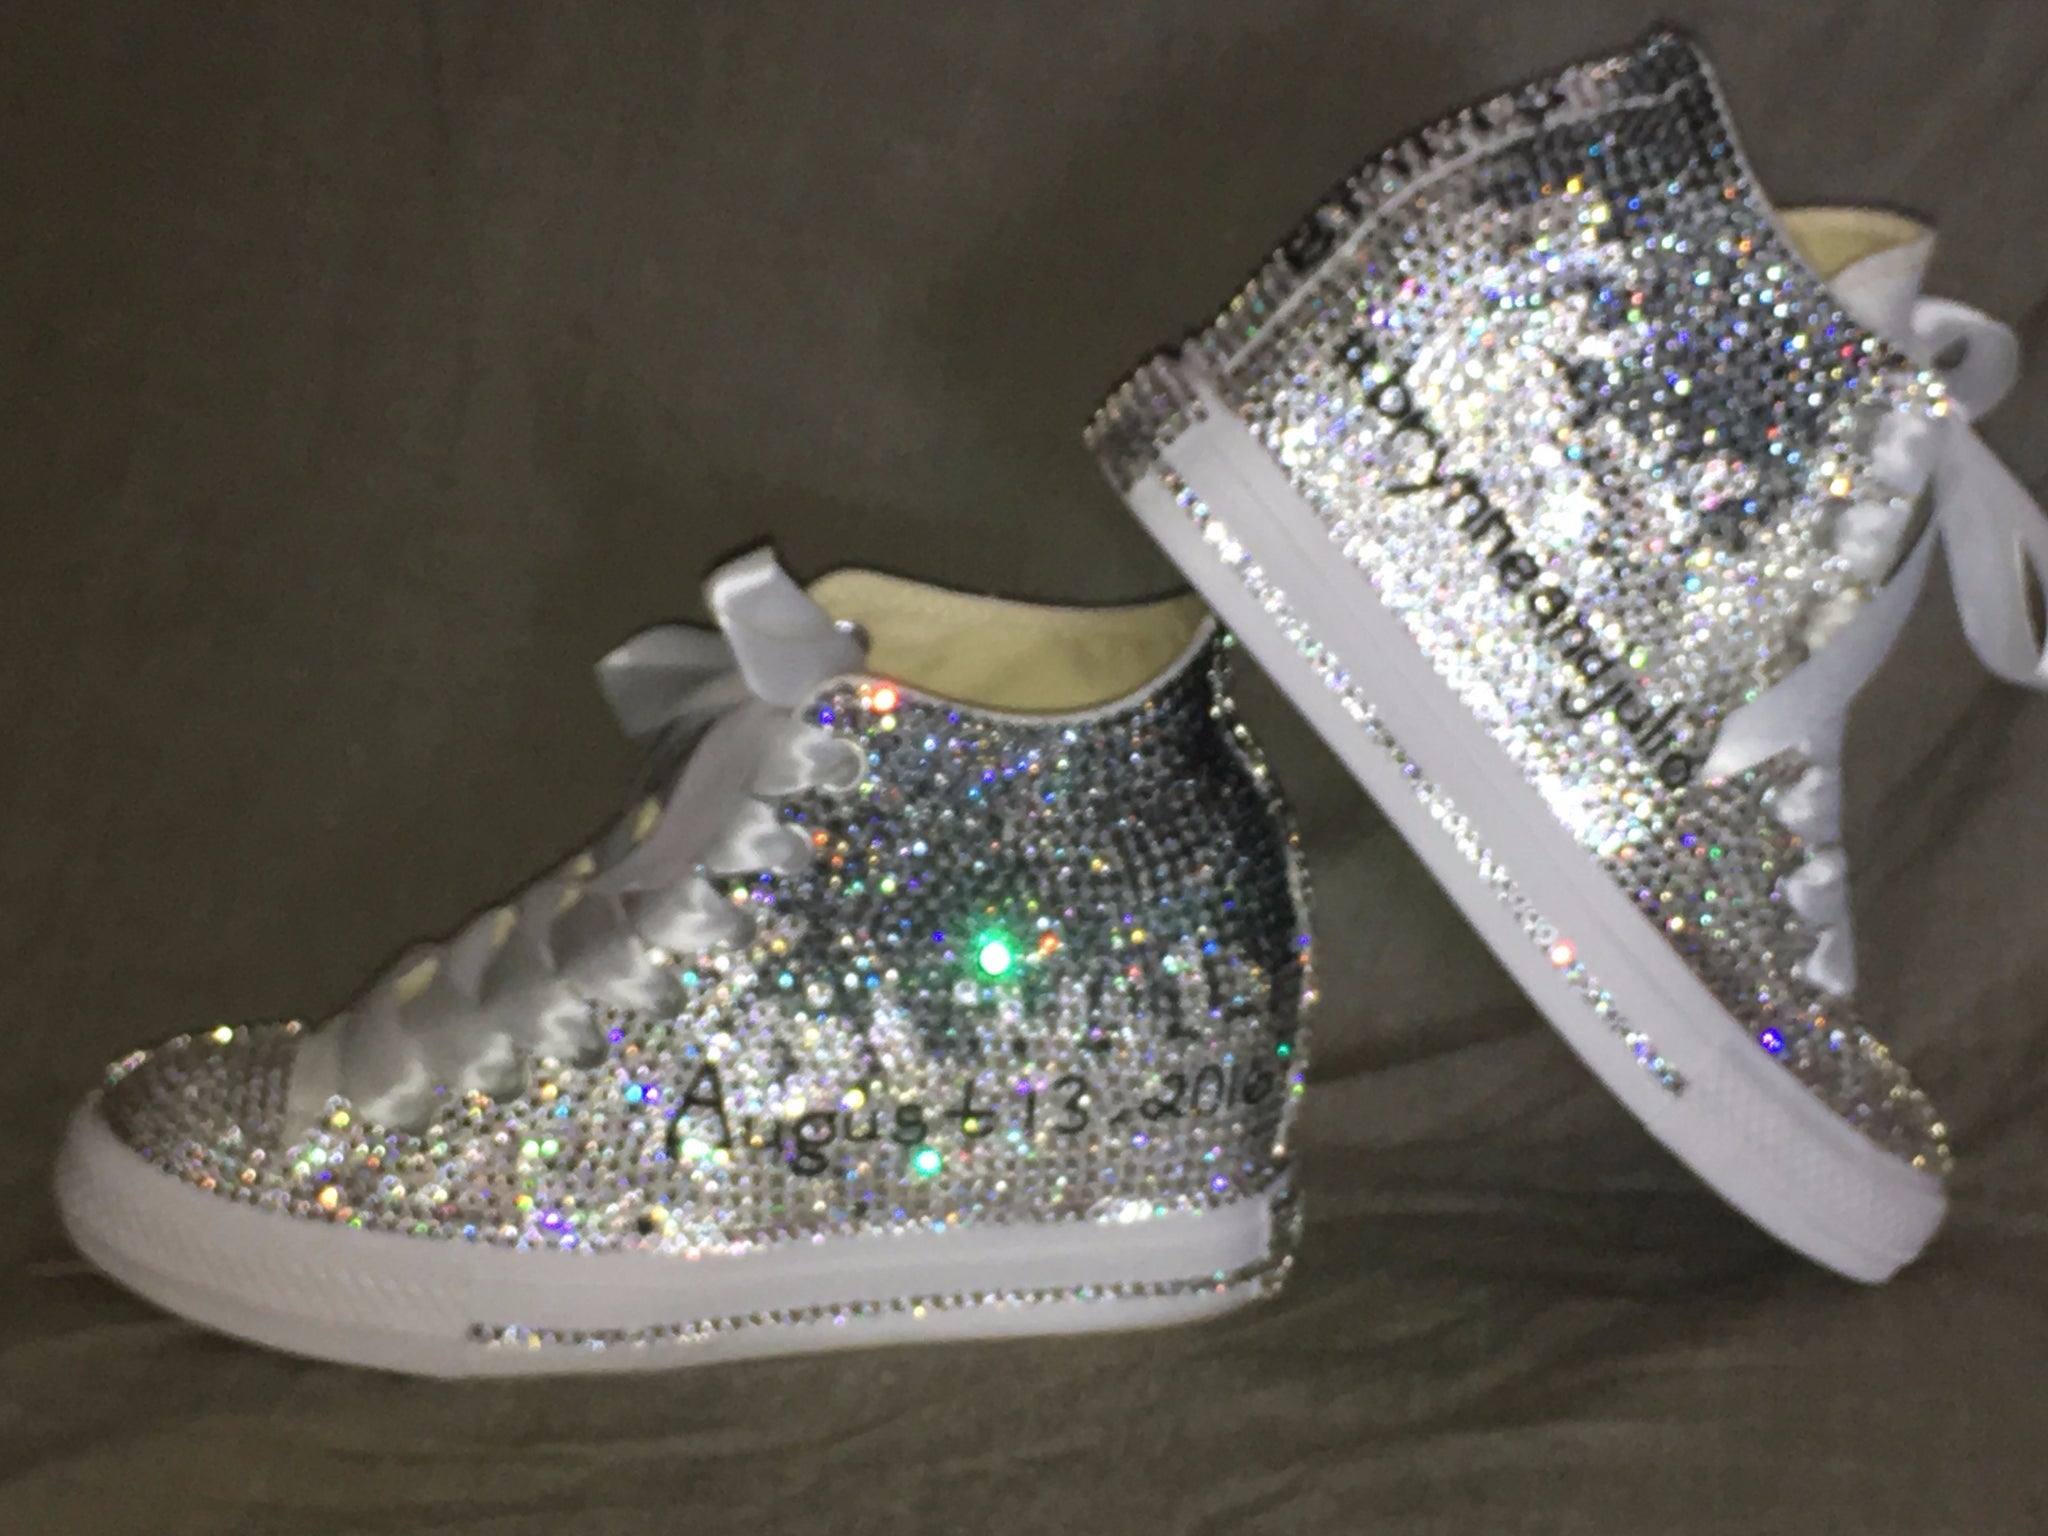 Women's Bling Converse Sneakers Embellished \u0026 Ombre Designed – Taylors-Penny